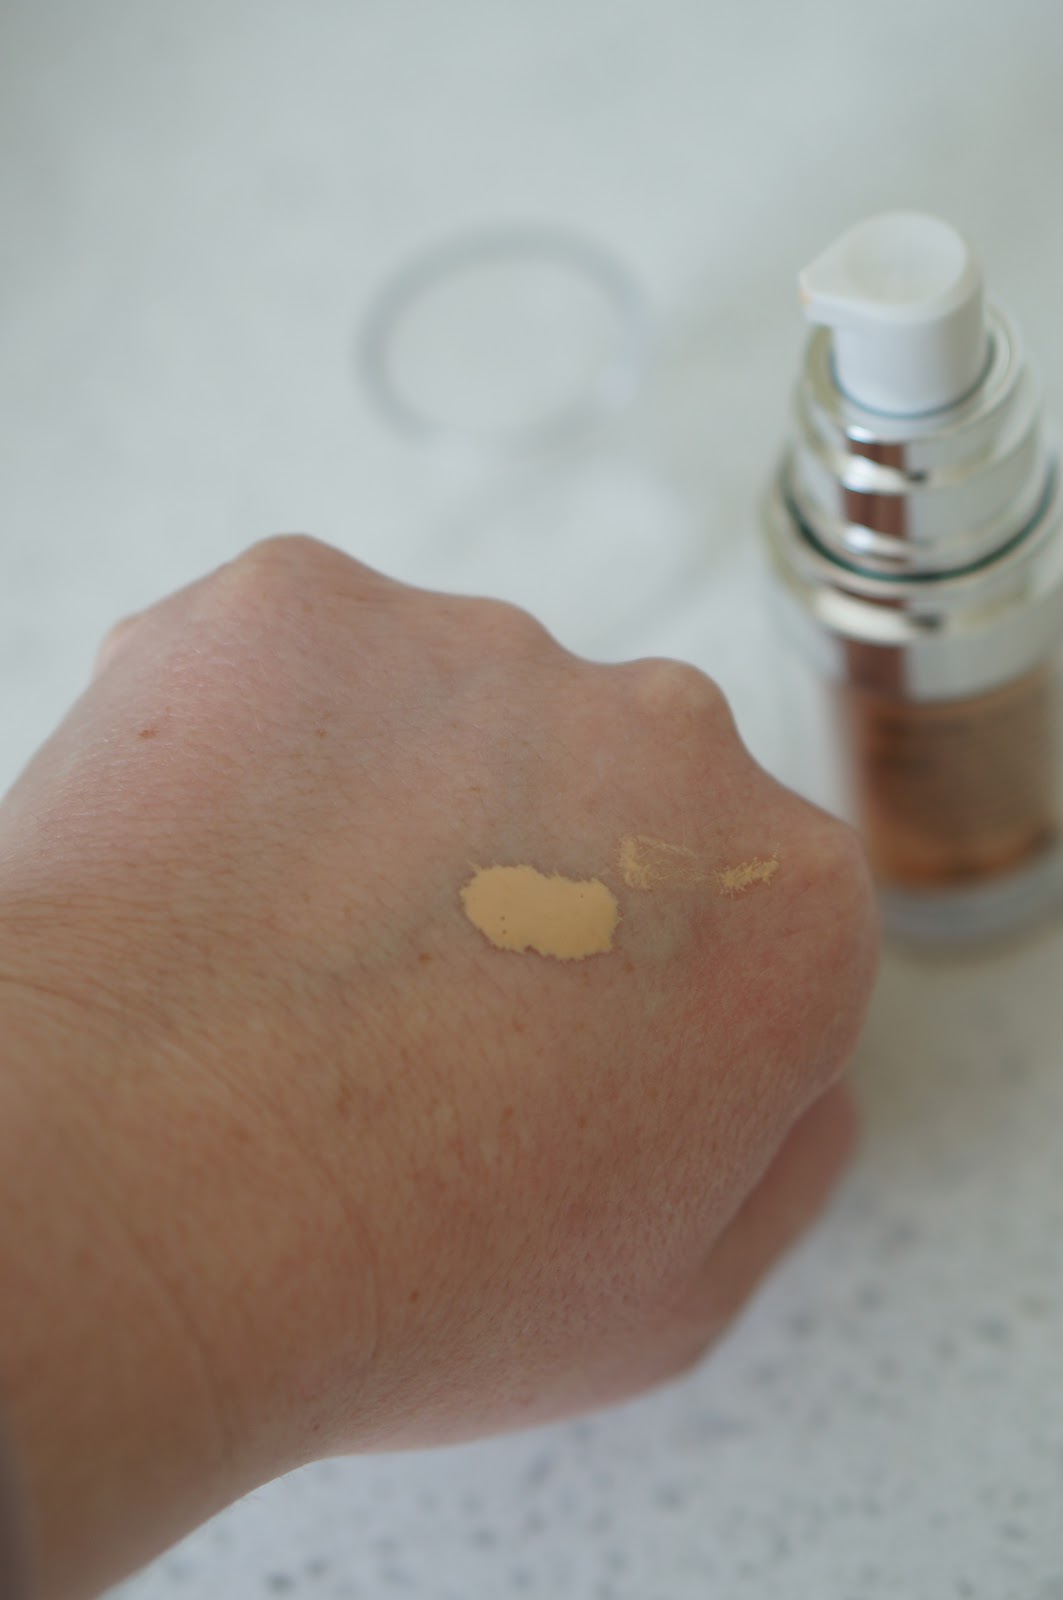 Popular North Carolina style blogger Rebecca Lately shares a cruelty free foundation Friday. Click here to read about the E.L.F. Beautifully Bare Foundation Serum!